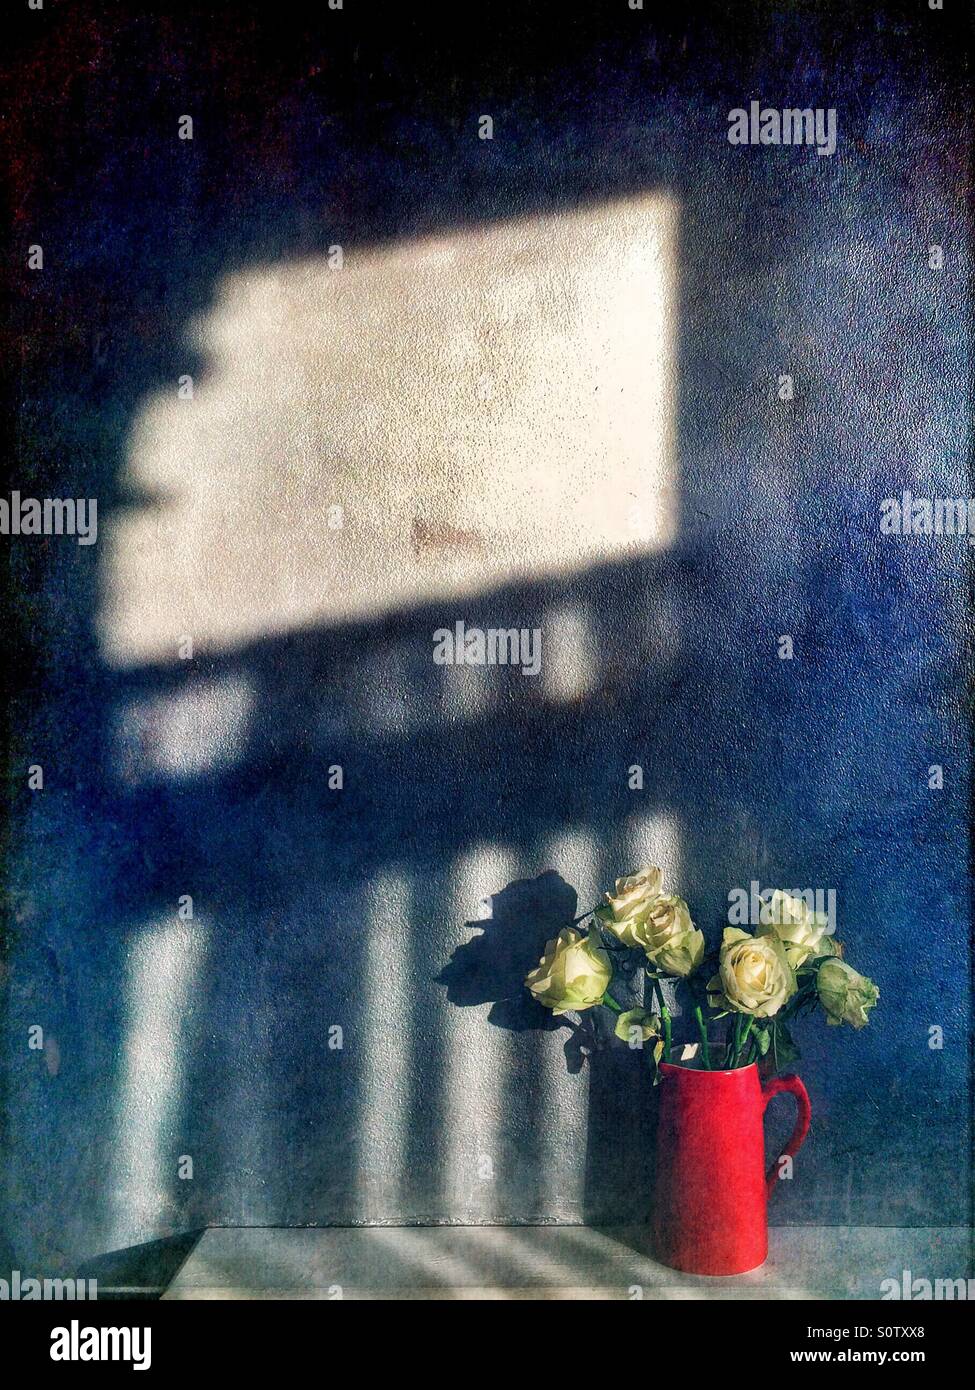 Still life - roses in a jug with shadows on the wall Stock Photo